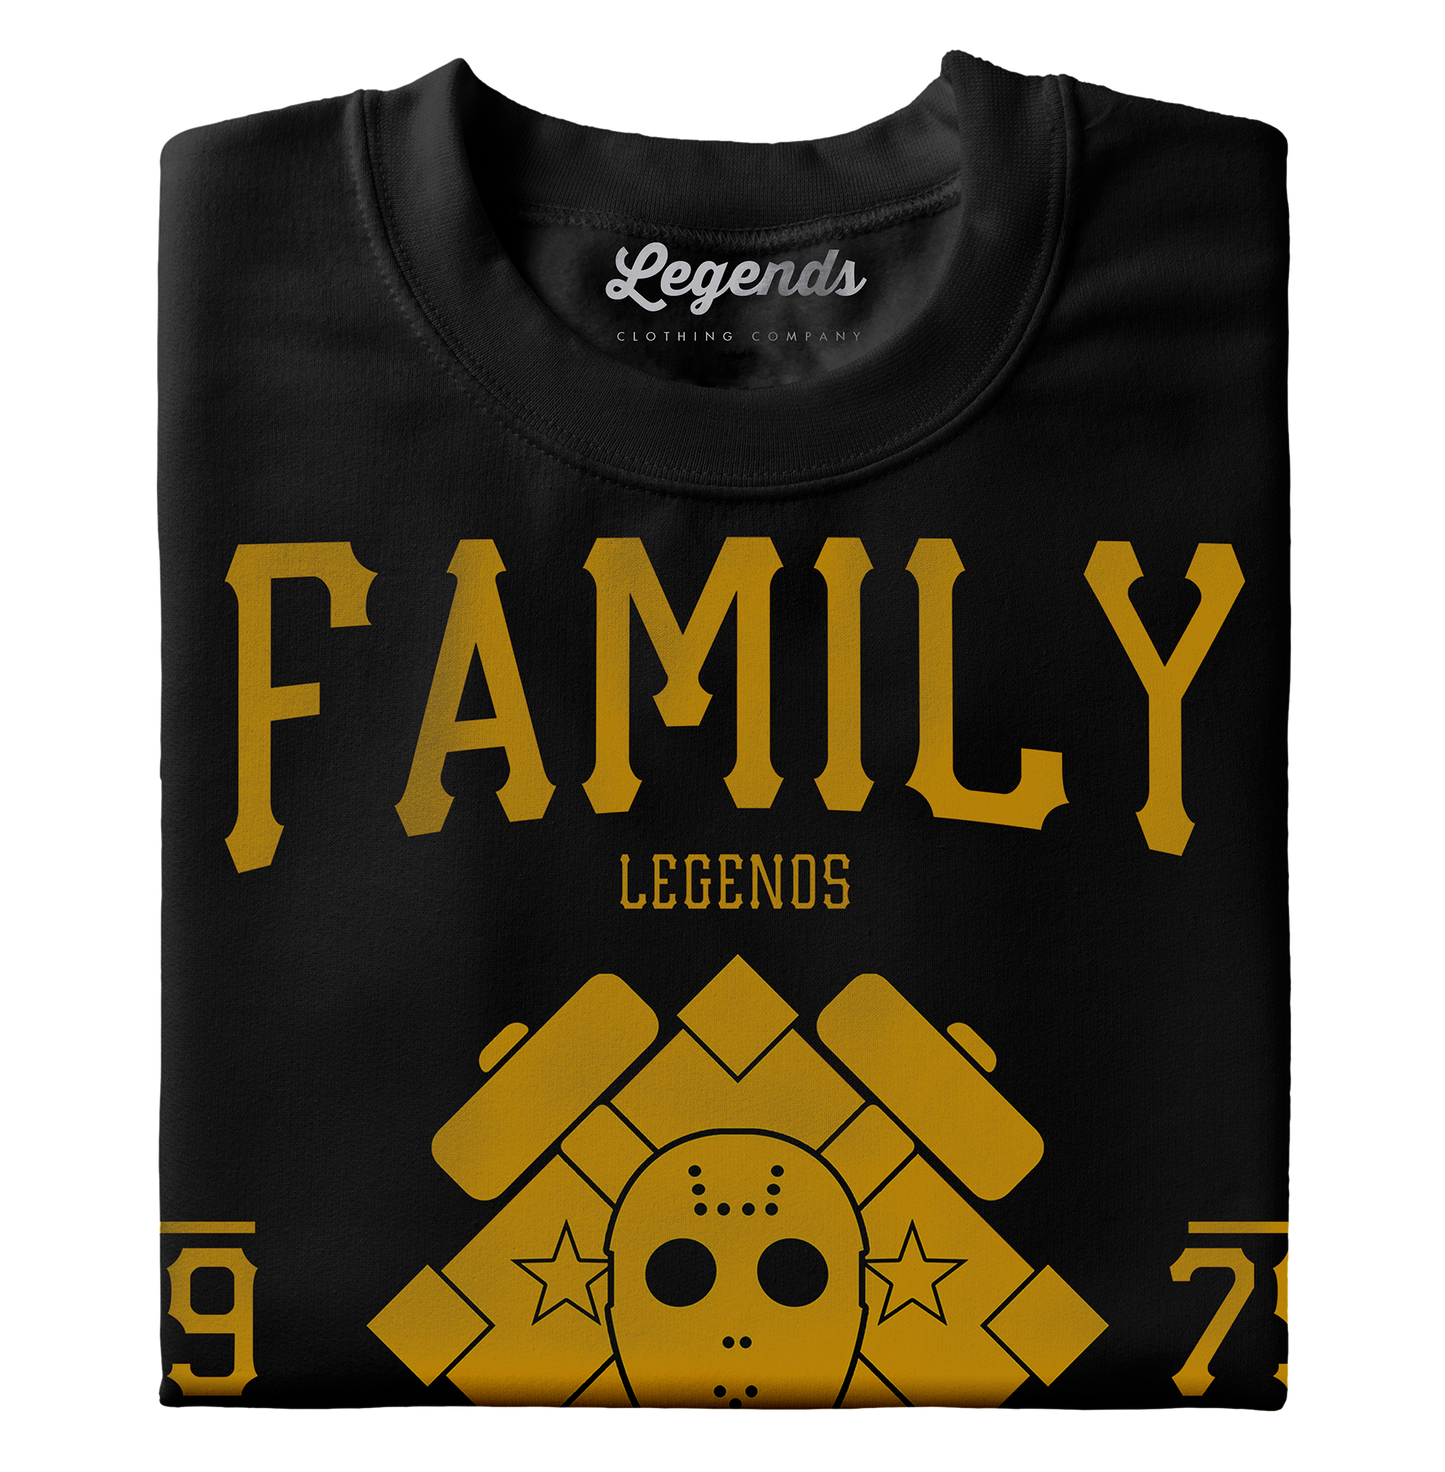 Pittsburgh We Are Family T-Shirt